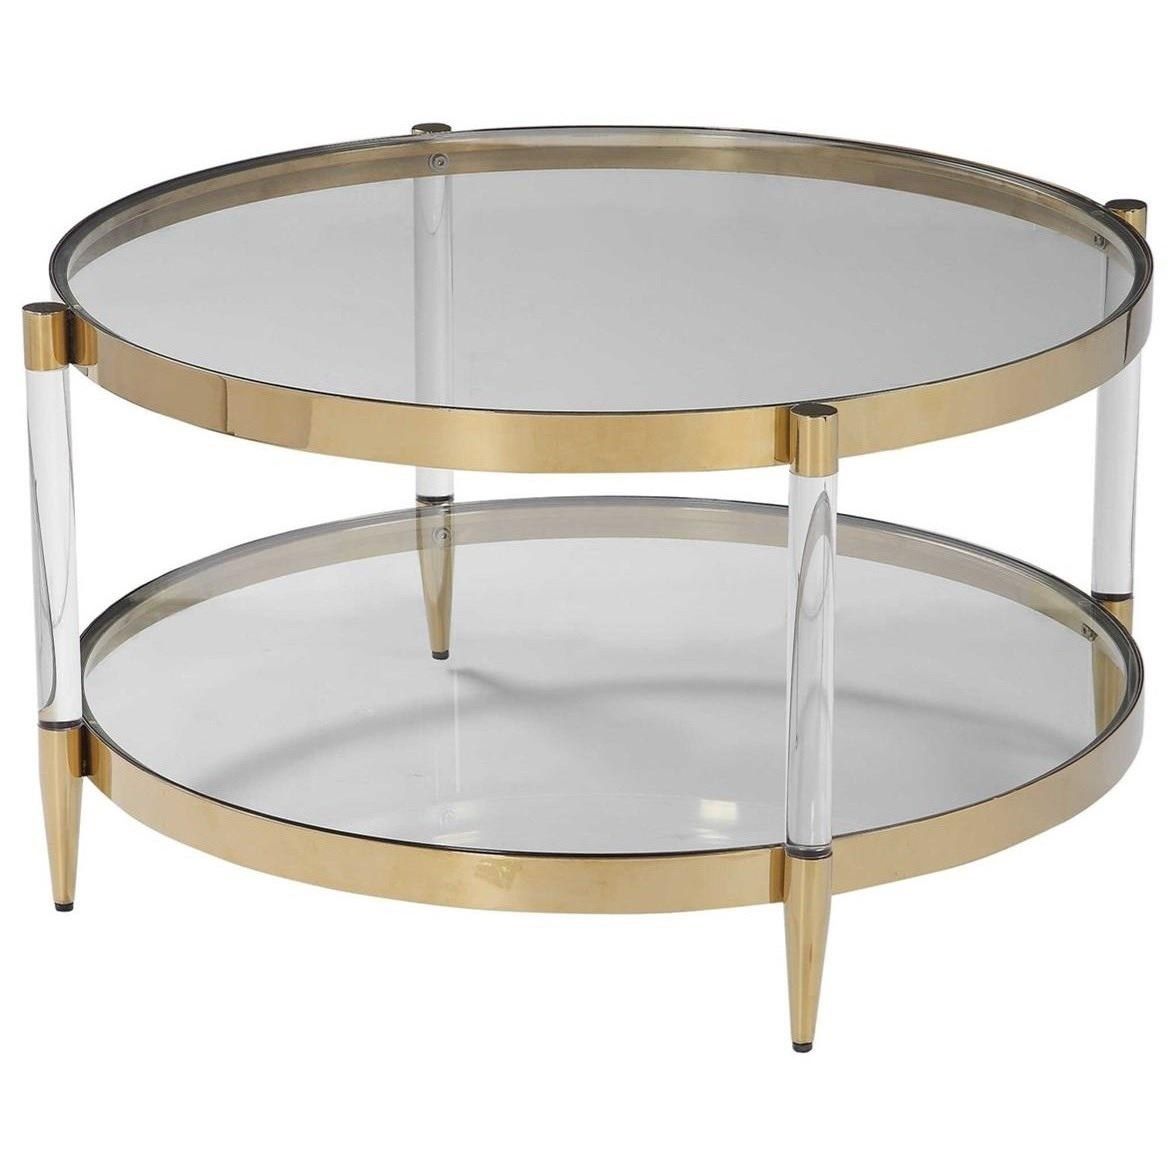 Uttermost Accent Furniture – Occasional Tables Kellen Glass Coffee Within Occasional Coffee Tables (View 18 of 20)